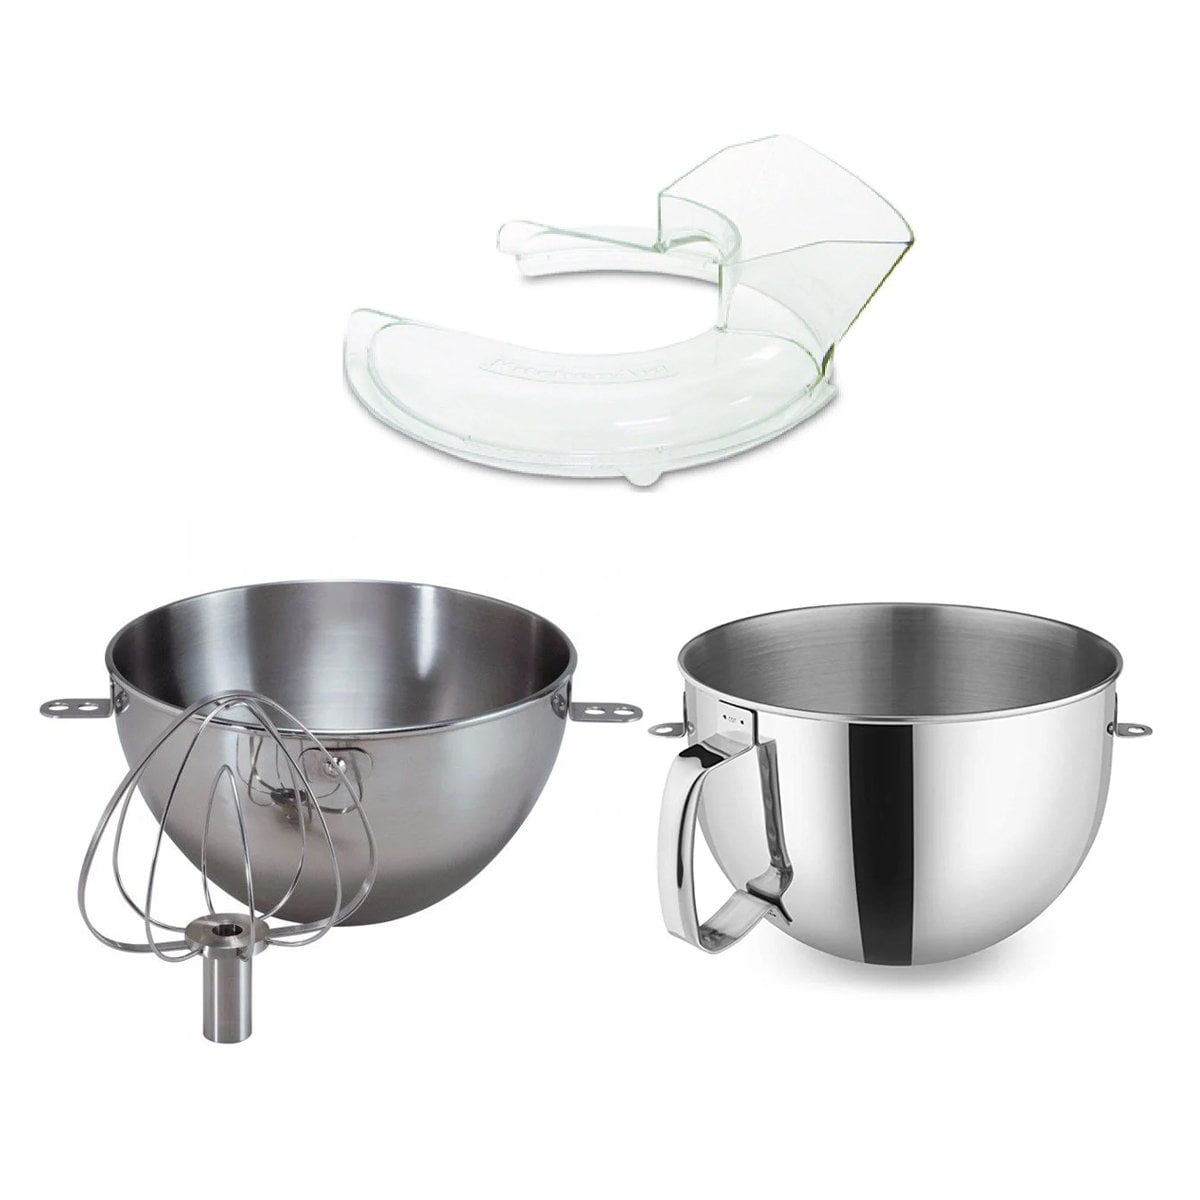 Stand Mixer Bowl Covers to Prevent Ingredients from Spilling, Fits Bowl-Lift  Models KV25G and KP26M1X (2 Pack)